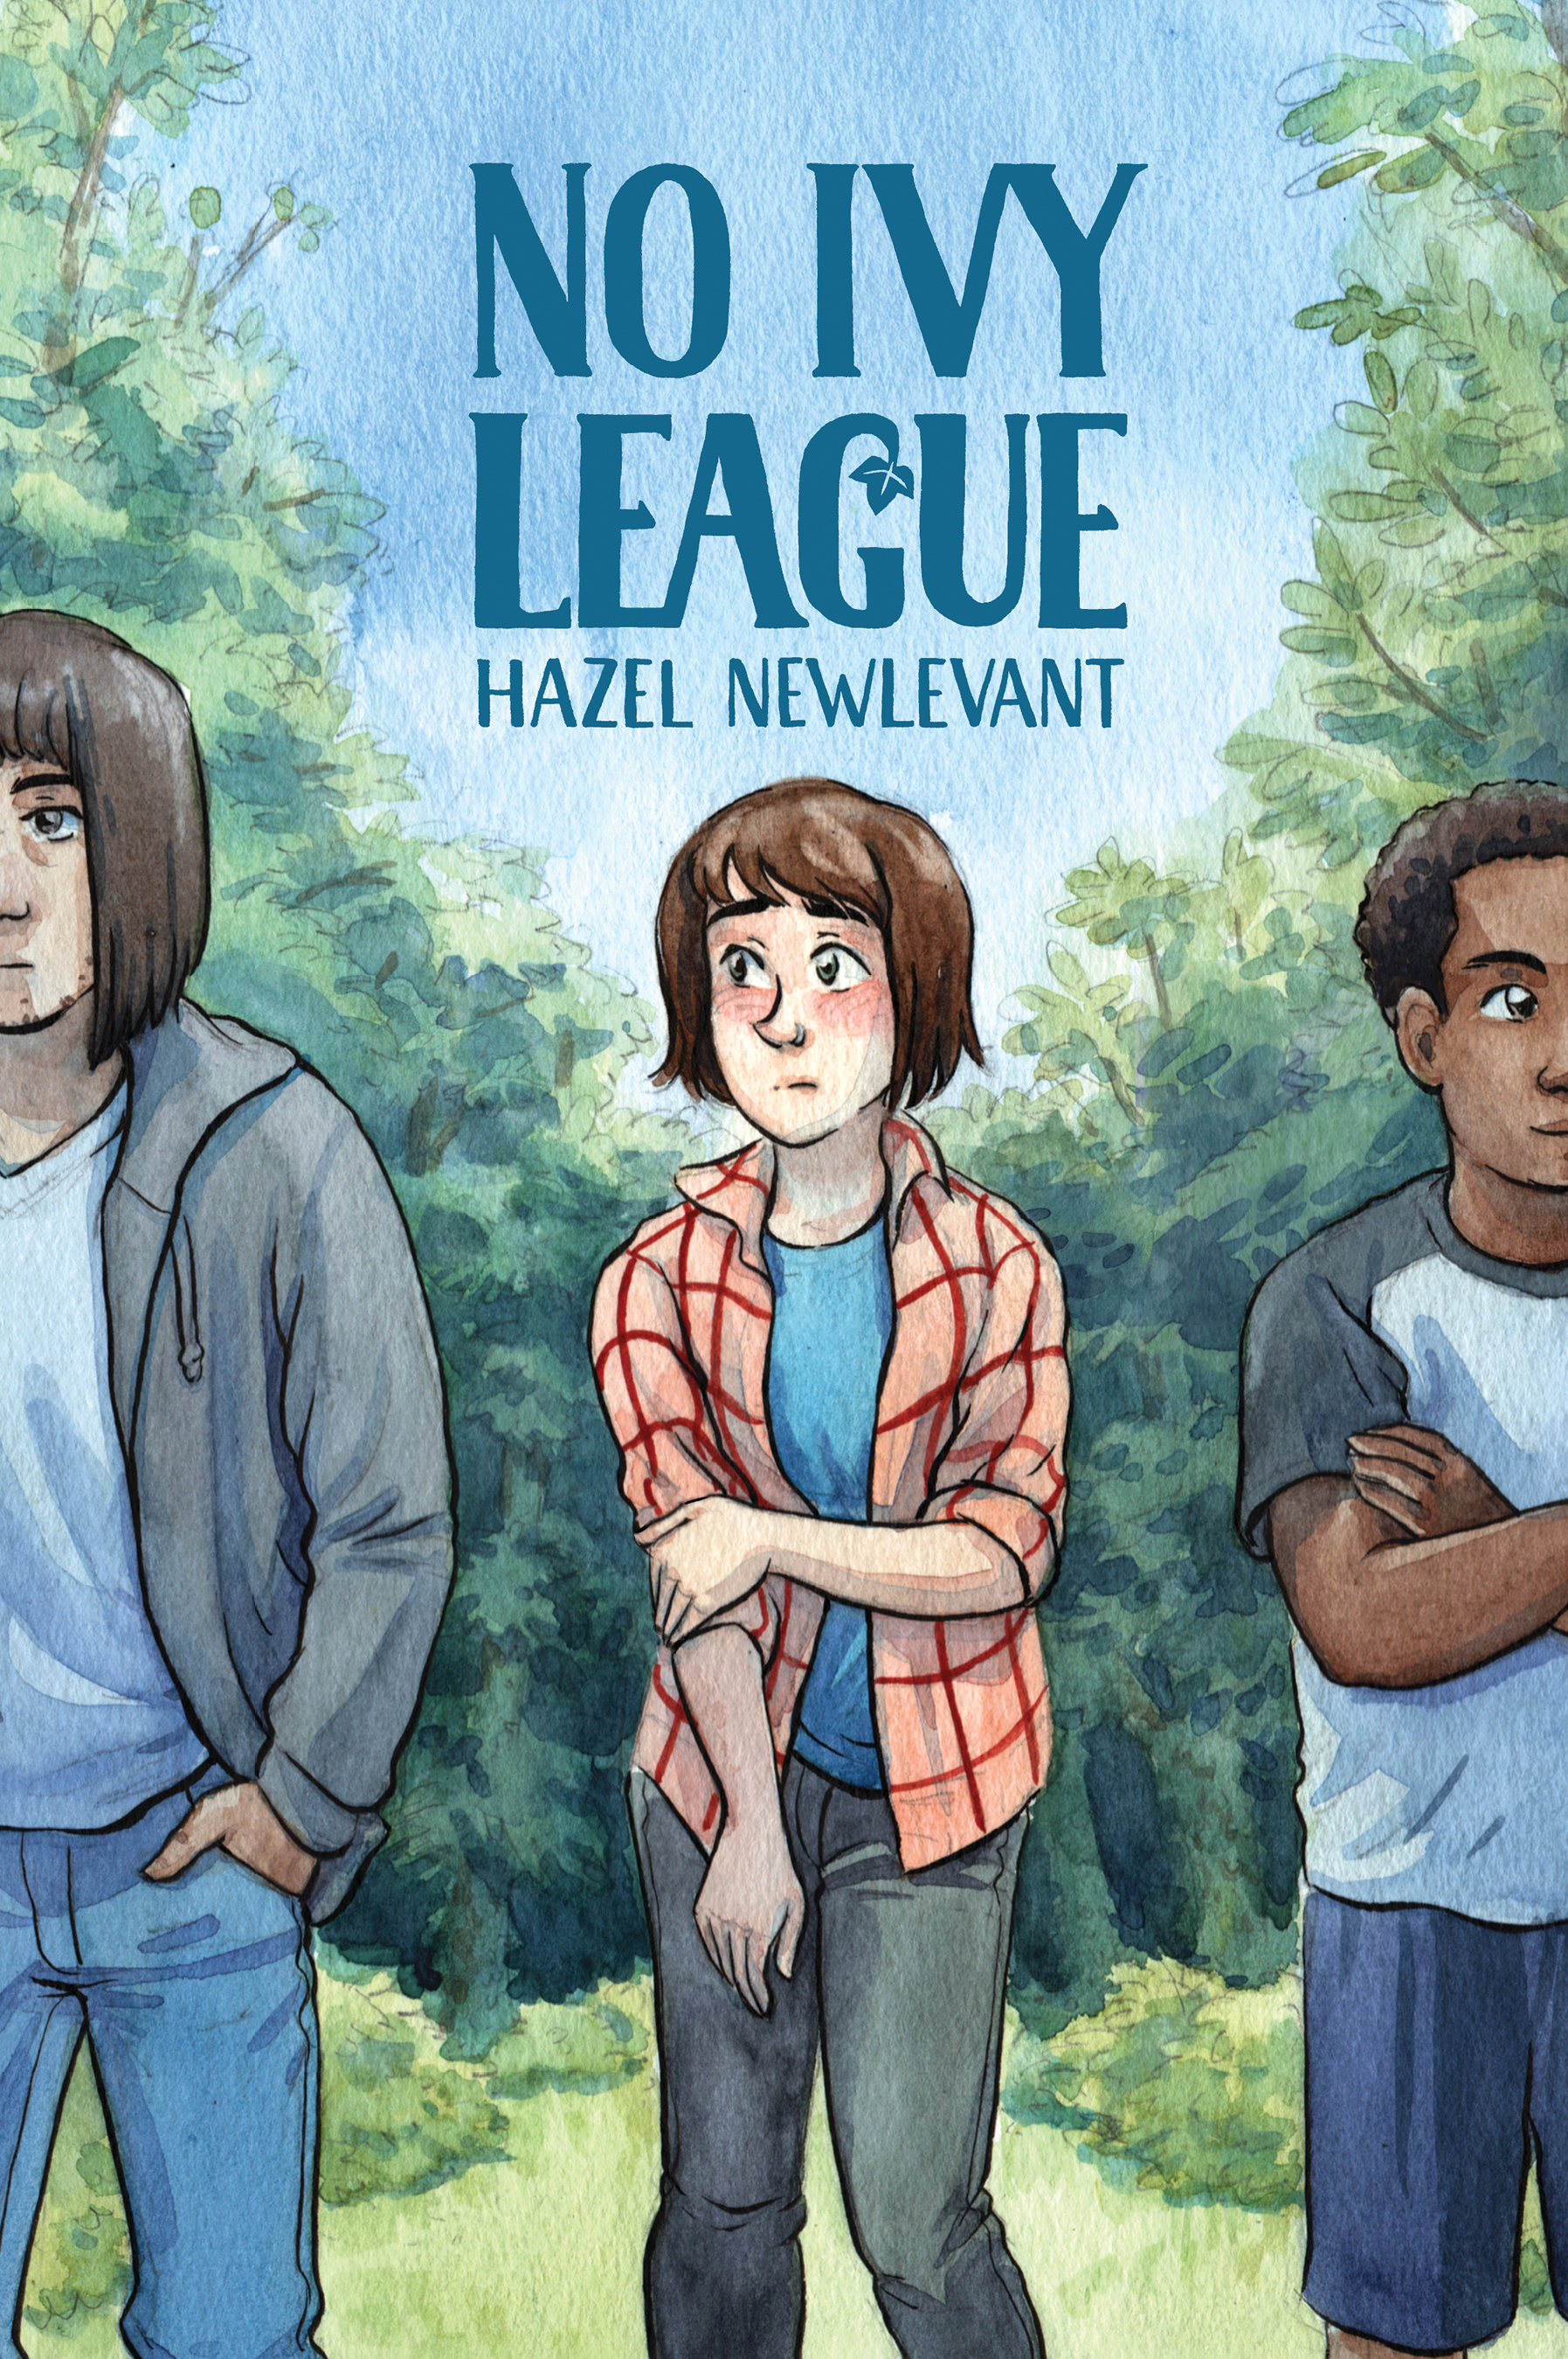 No Ivy League cover art by Hazel Newlevant